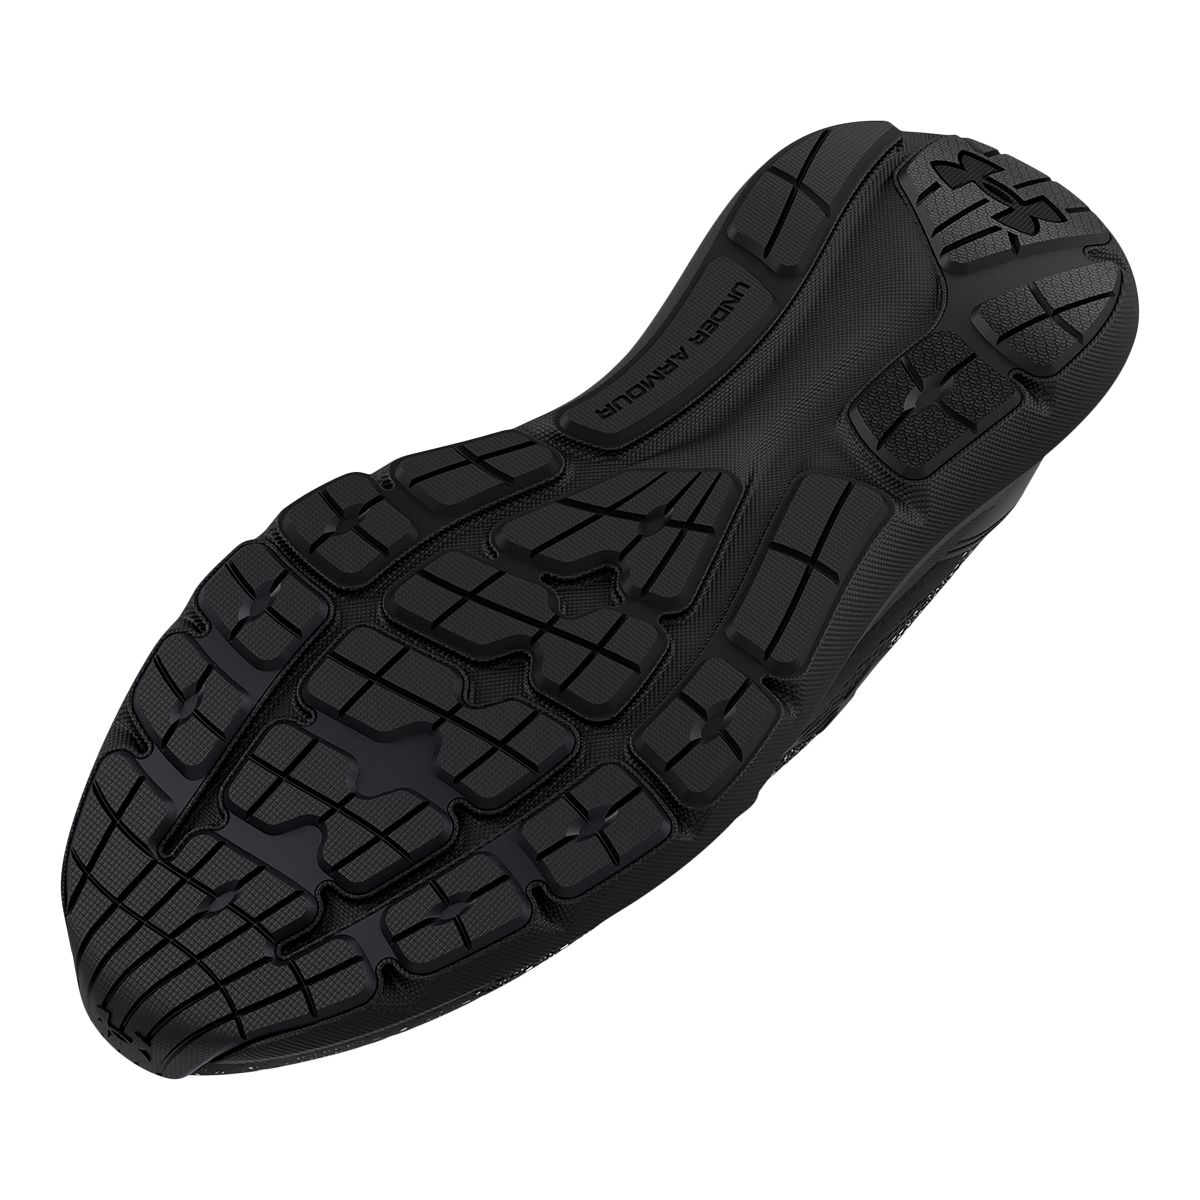 Giant Surge Pro road cycling shoes review | Cyclingnews